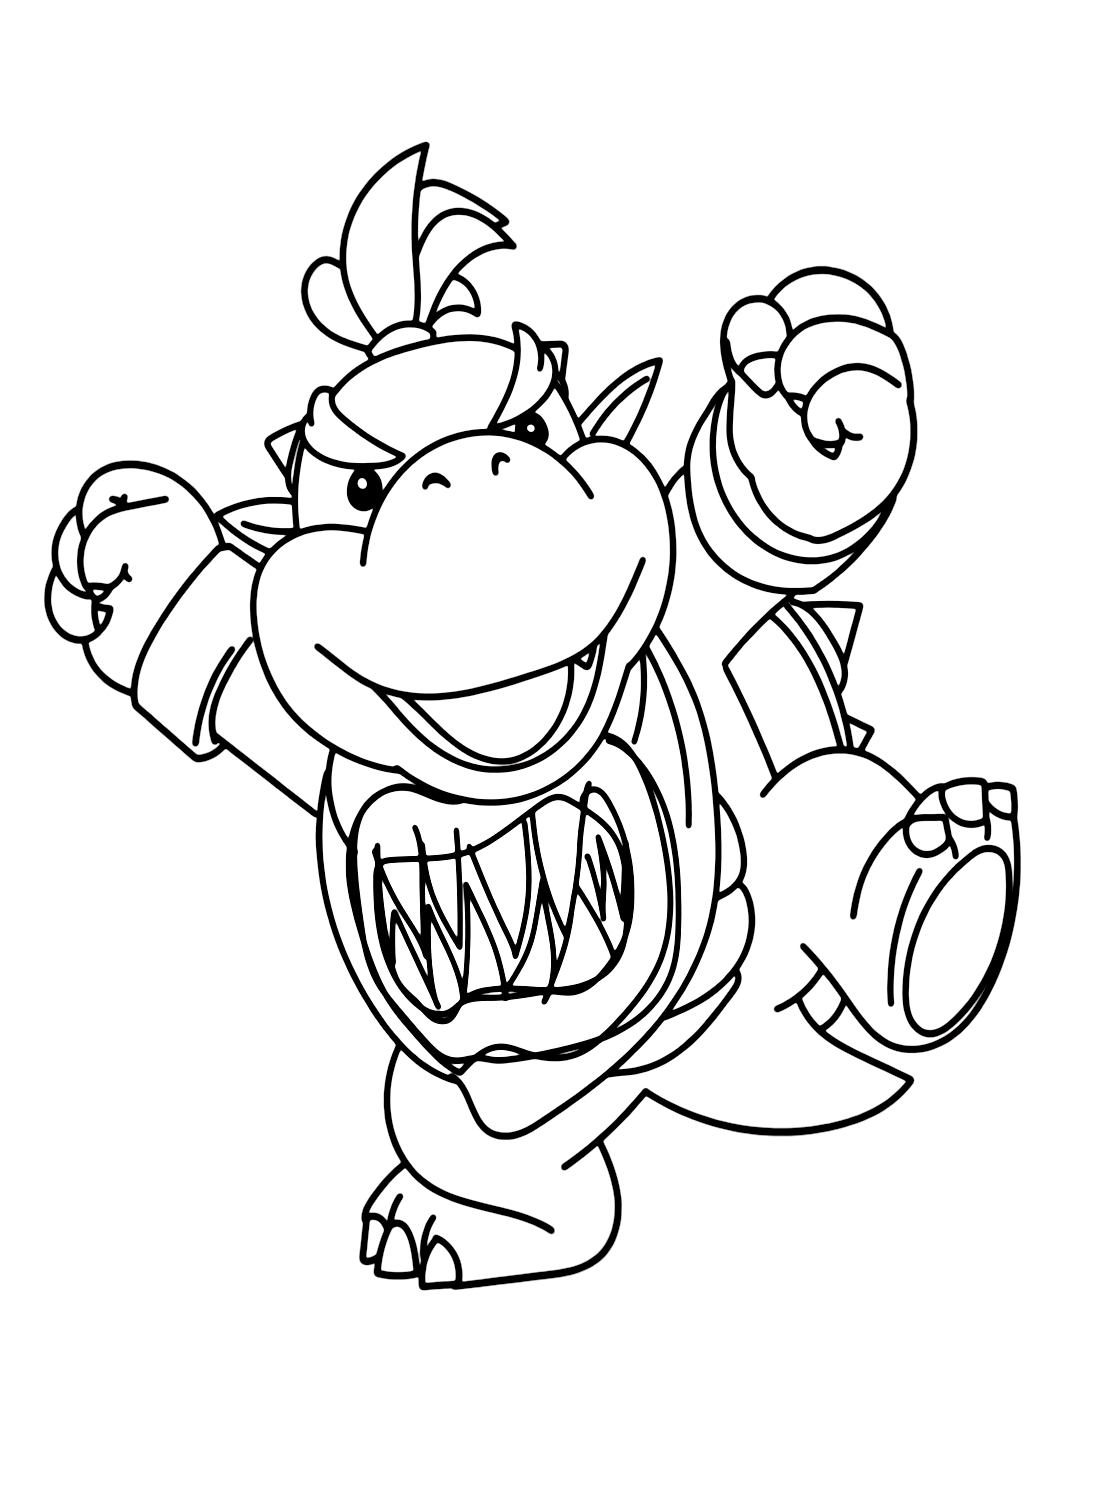 Bowser Jr. From Super Mario Coloring Pages - Bowser Jr Coloring Pages pour Coloriage Mario Bowser